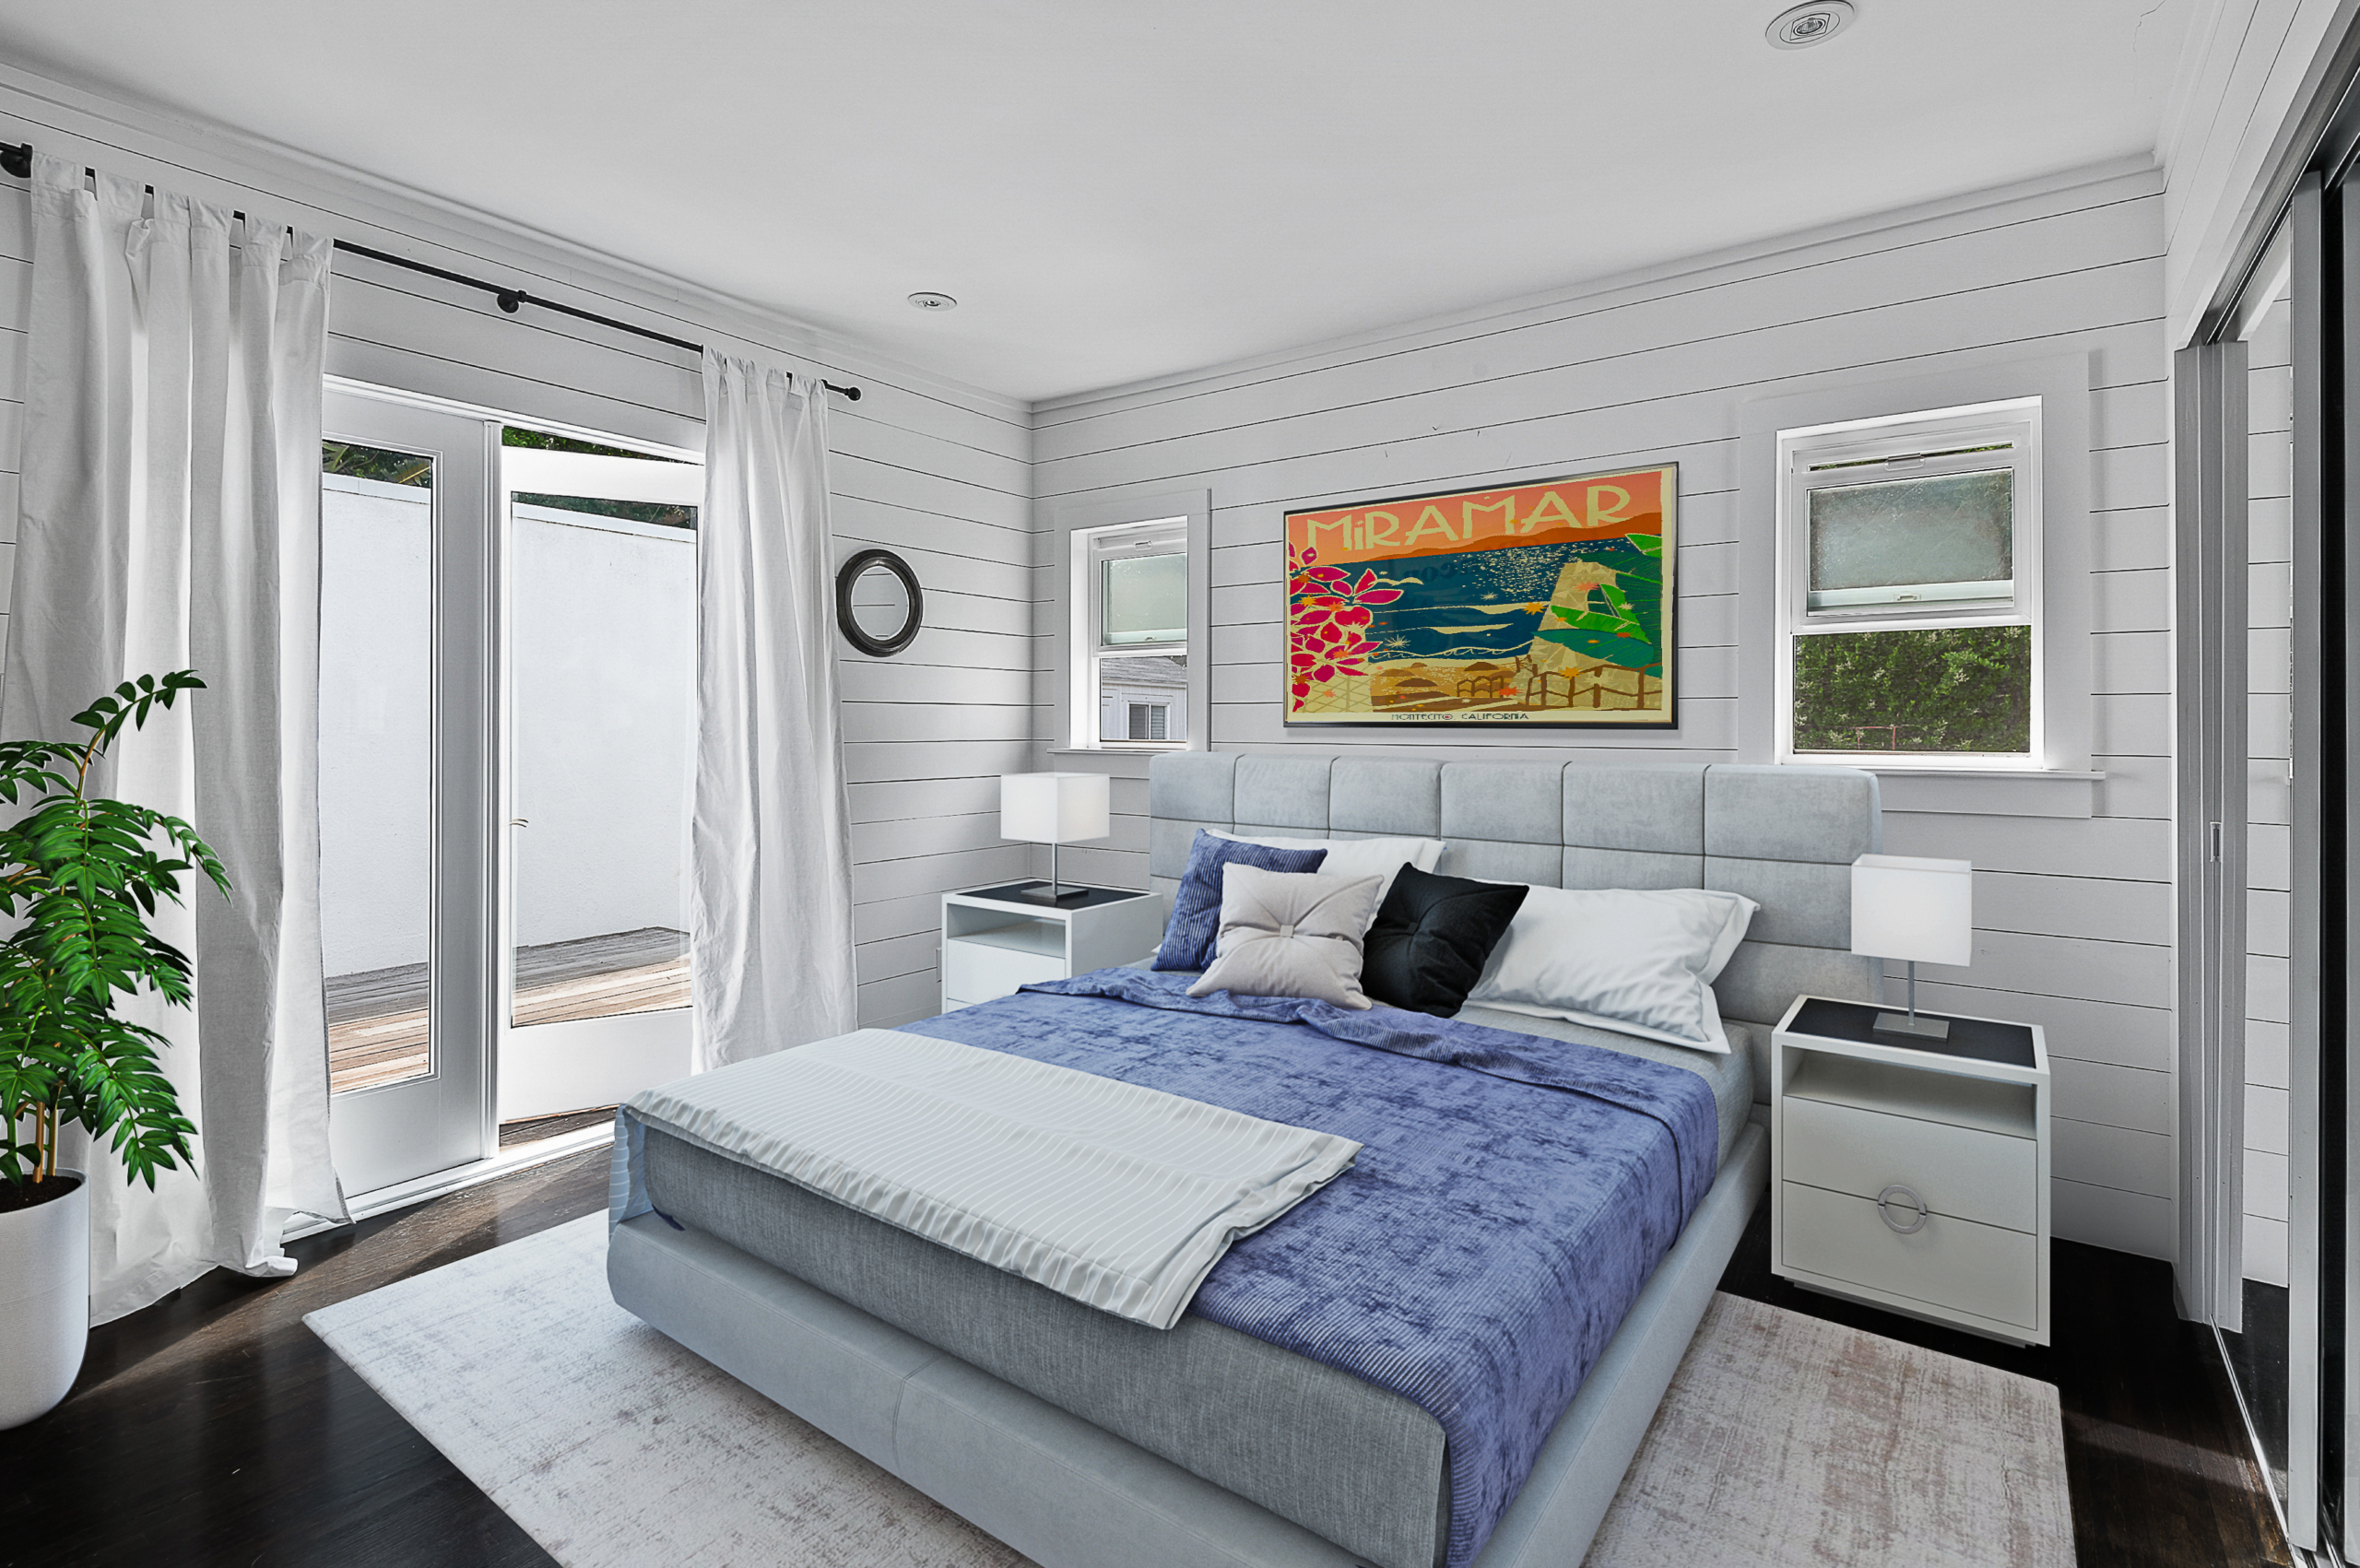 Bright white bedroom with shiplap white walls, dark flooring and glass doors to patio